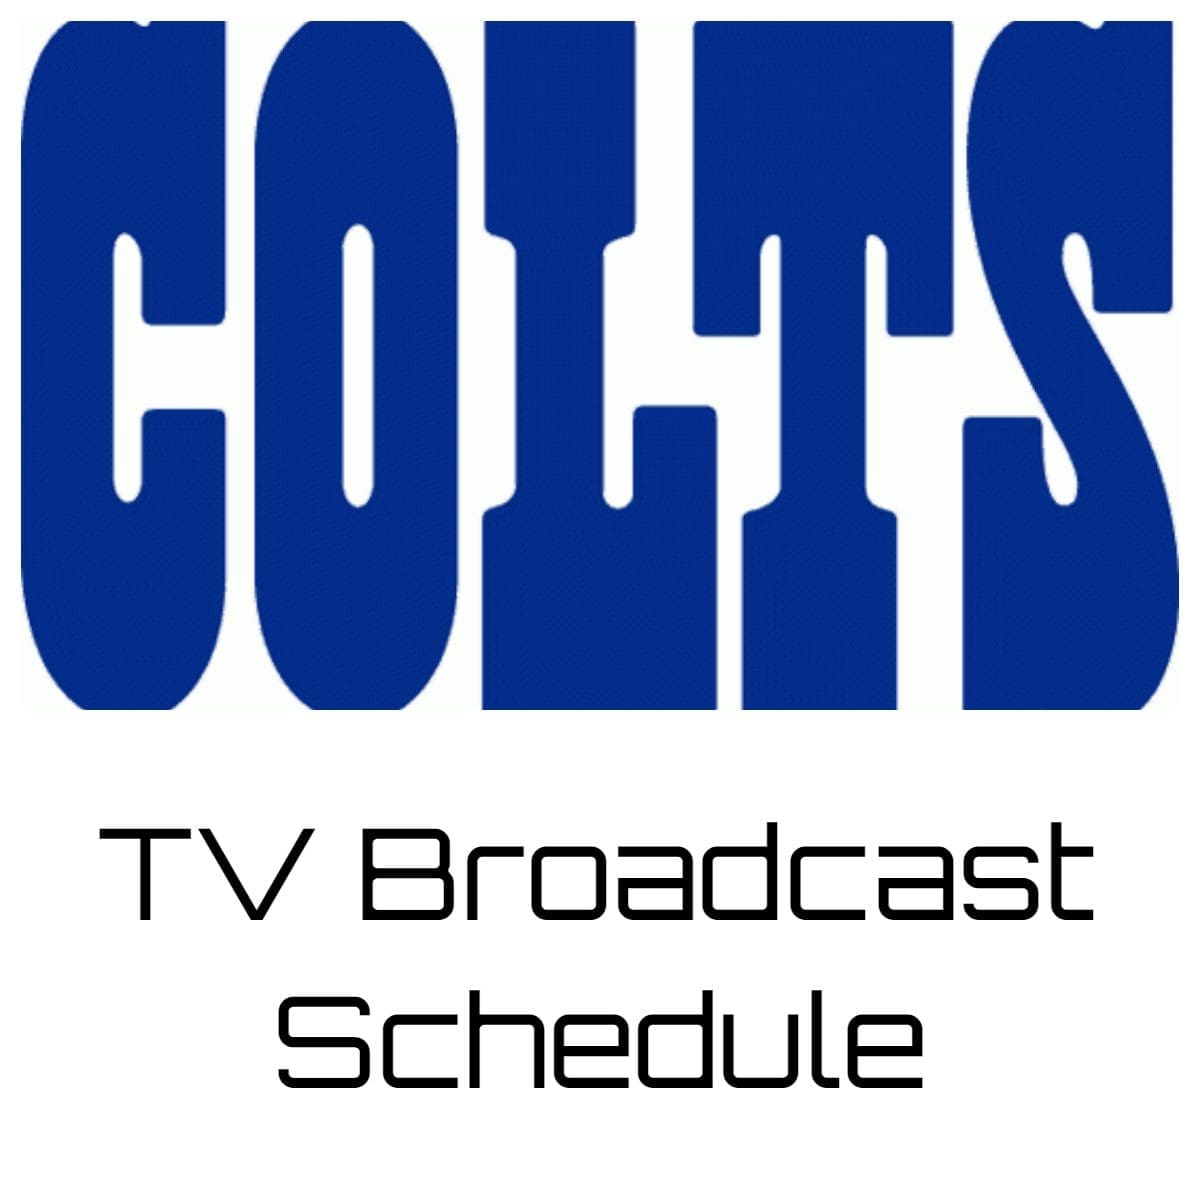 Indianapolis Colts TV Broadcast Schedule